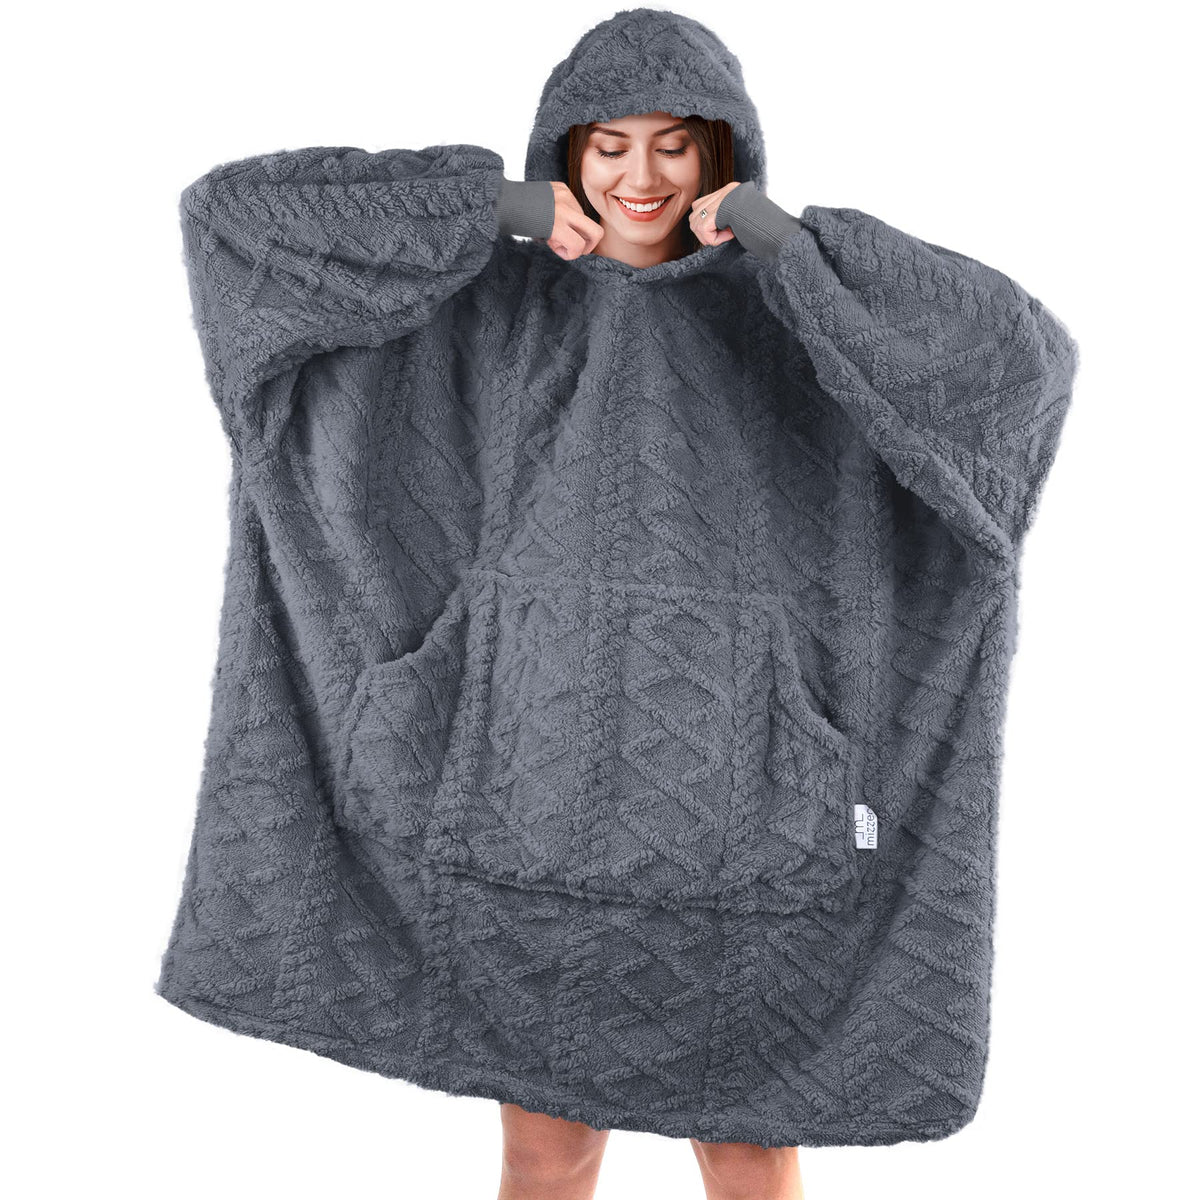 The Comfy Original Oversized Microfiber Wearable Blanket for Adults, Grey 